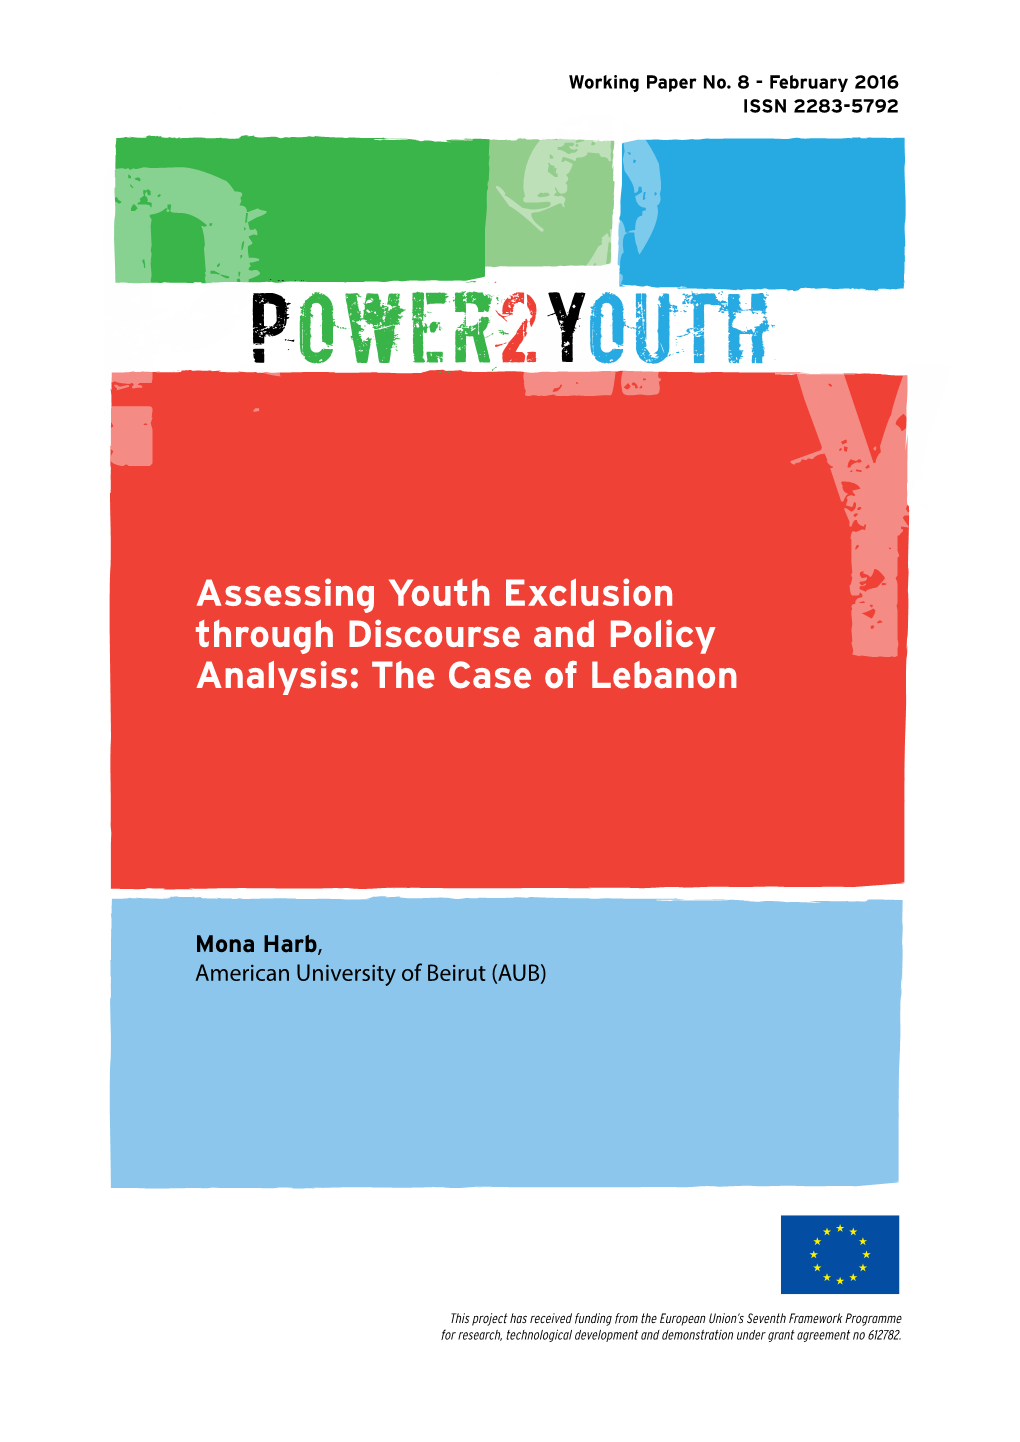 Assessing Youth Exclusion Through Discourse and Policy Analysis: the Case of Lebanon